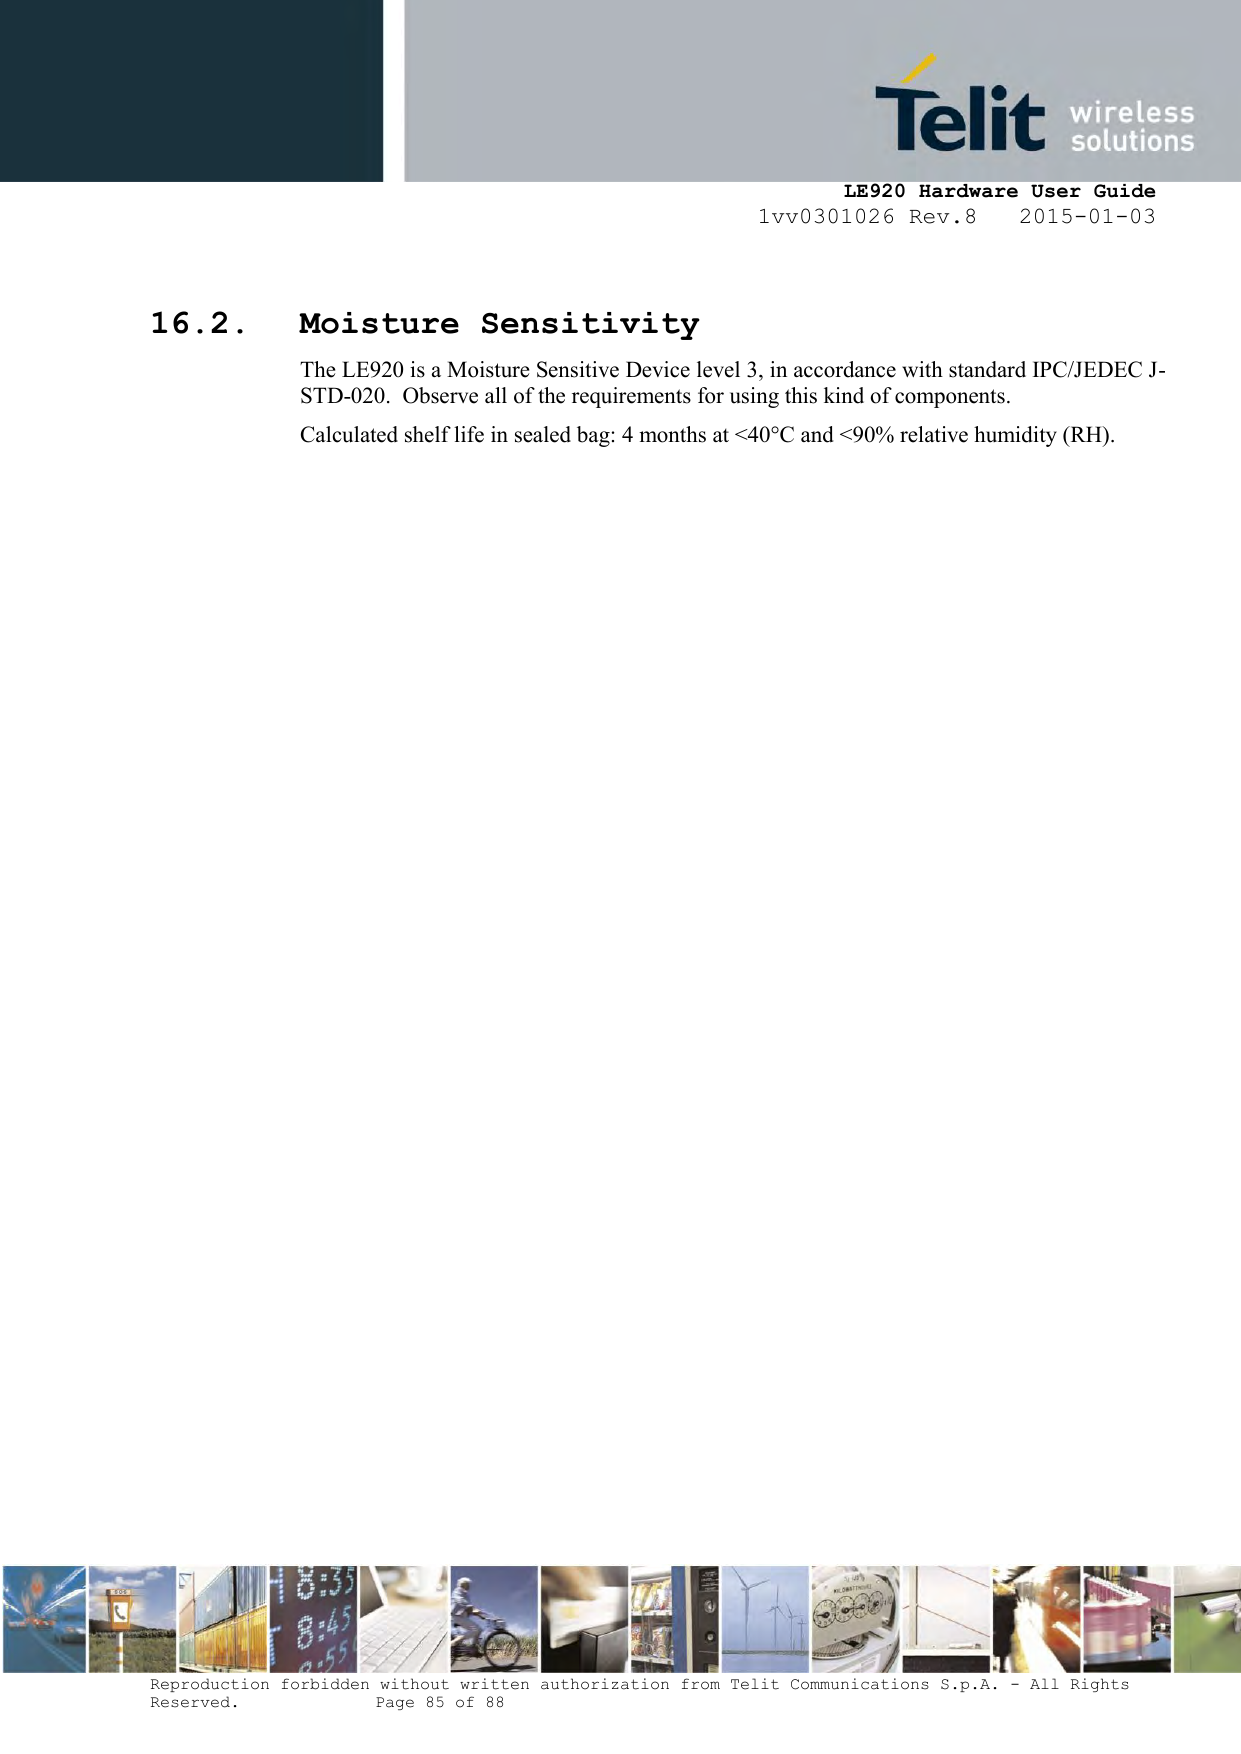     LE920 Hardware User Guide 1vv0301026 Rev.8   2015-01-03 Reproduction forbidden without written authorization from Telit Communications S.p.A. - All Rights Reserved.    Page 85 of 88   16.2. Moisture Sensitivity The LE920 is a Moisture Sensitive Device level 3, in accordance with standard IPC/JEDEC J-STD-020.  Observe all of the requirements for using this kind of components. Calculated shelf life in sealed bag: 4 months at &lt;40°C and &lt;90% relative humidity (RH). 